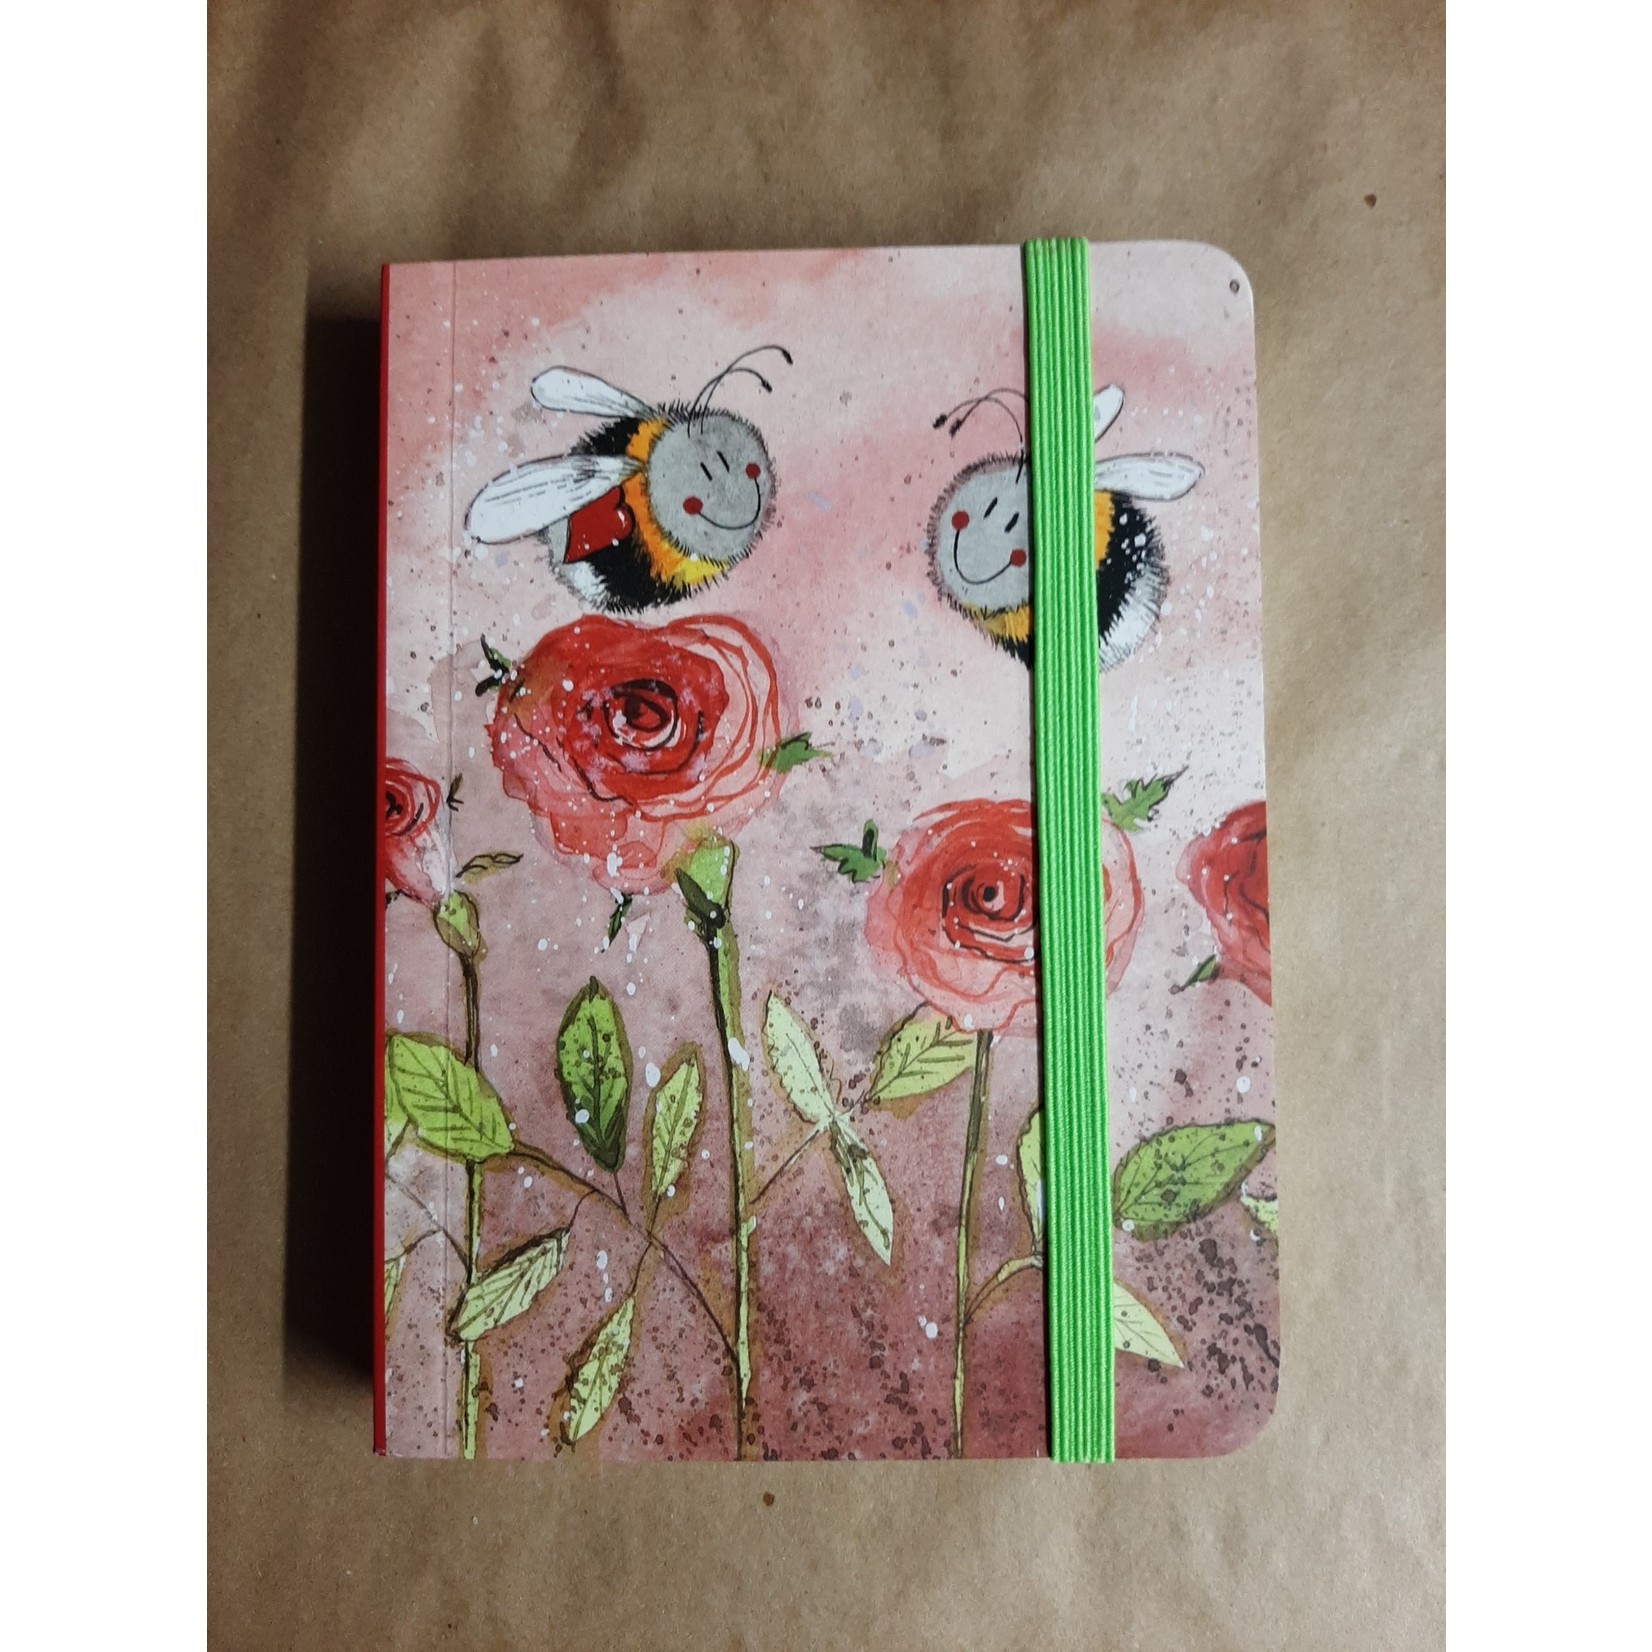 Alex Clark Chunky Notebook - Small - Bees and Roses (CG)